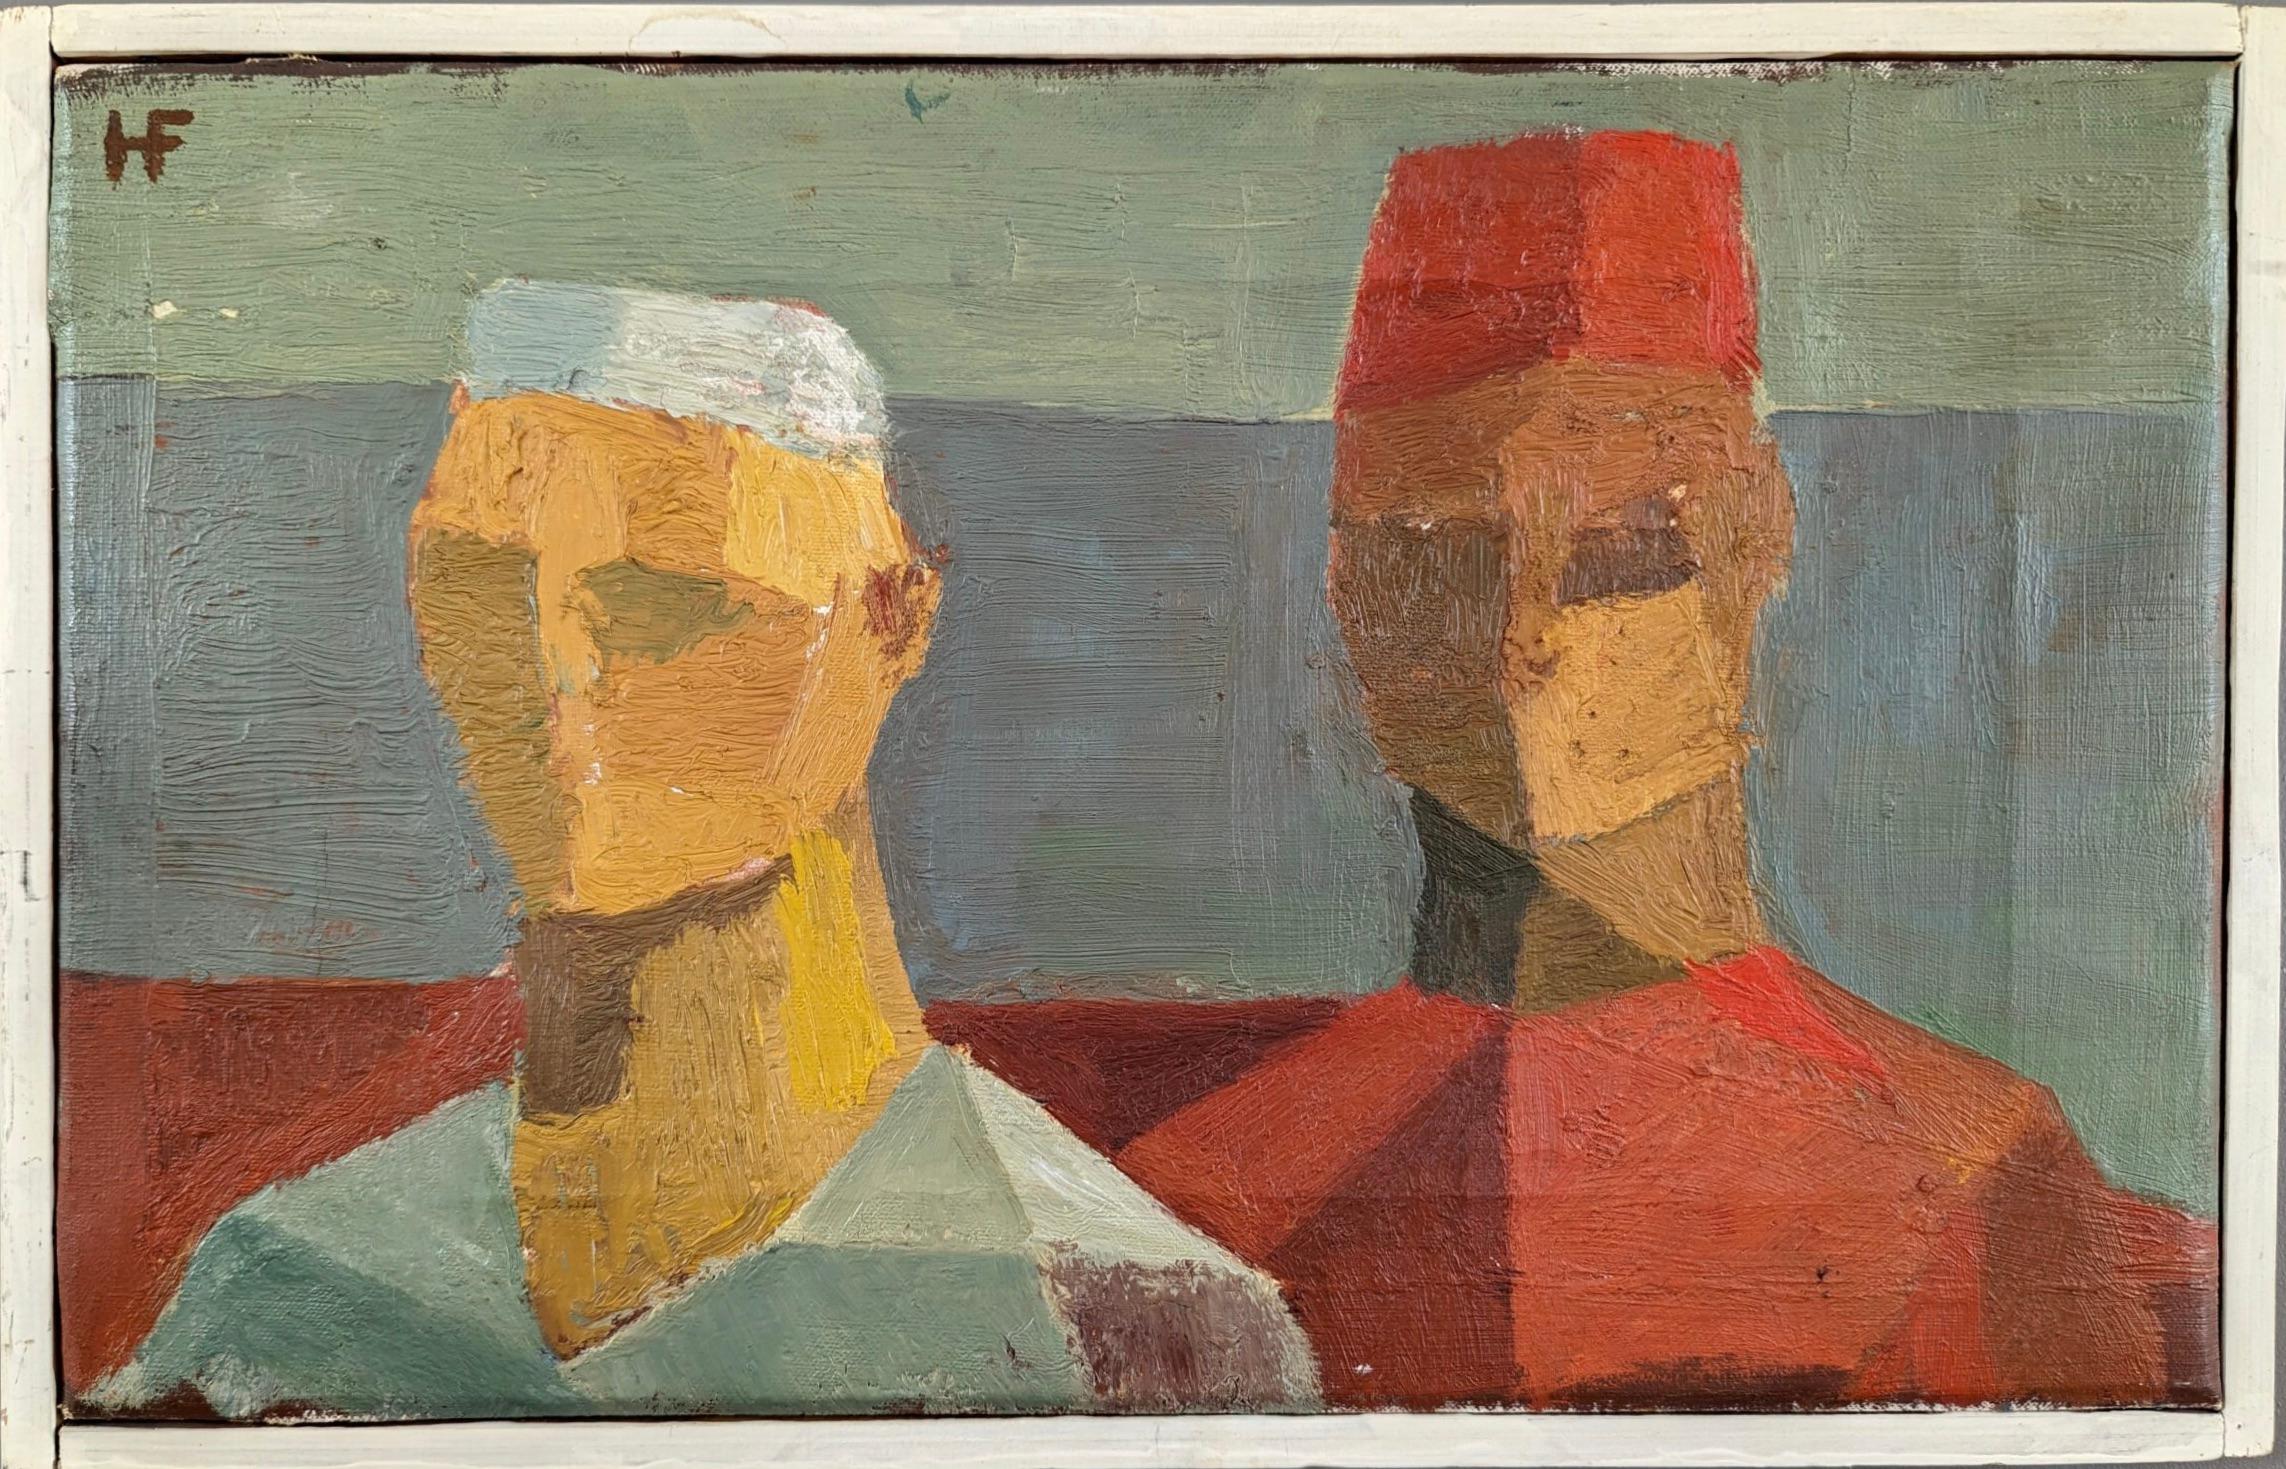 Unknown Figurative Painting - Vintage Mid-Century Modern Swedish Figurative Oil Painting - Figures in Hats